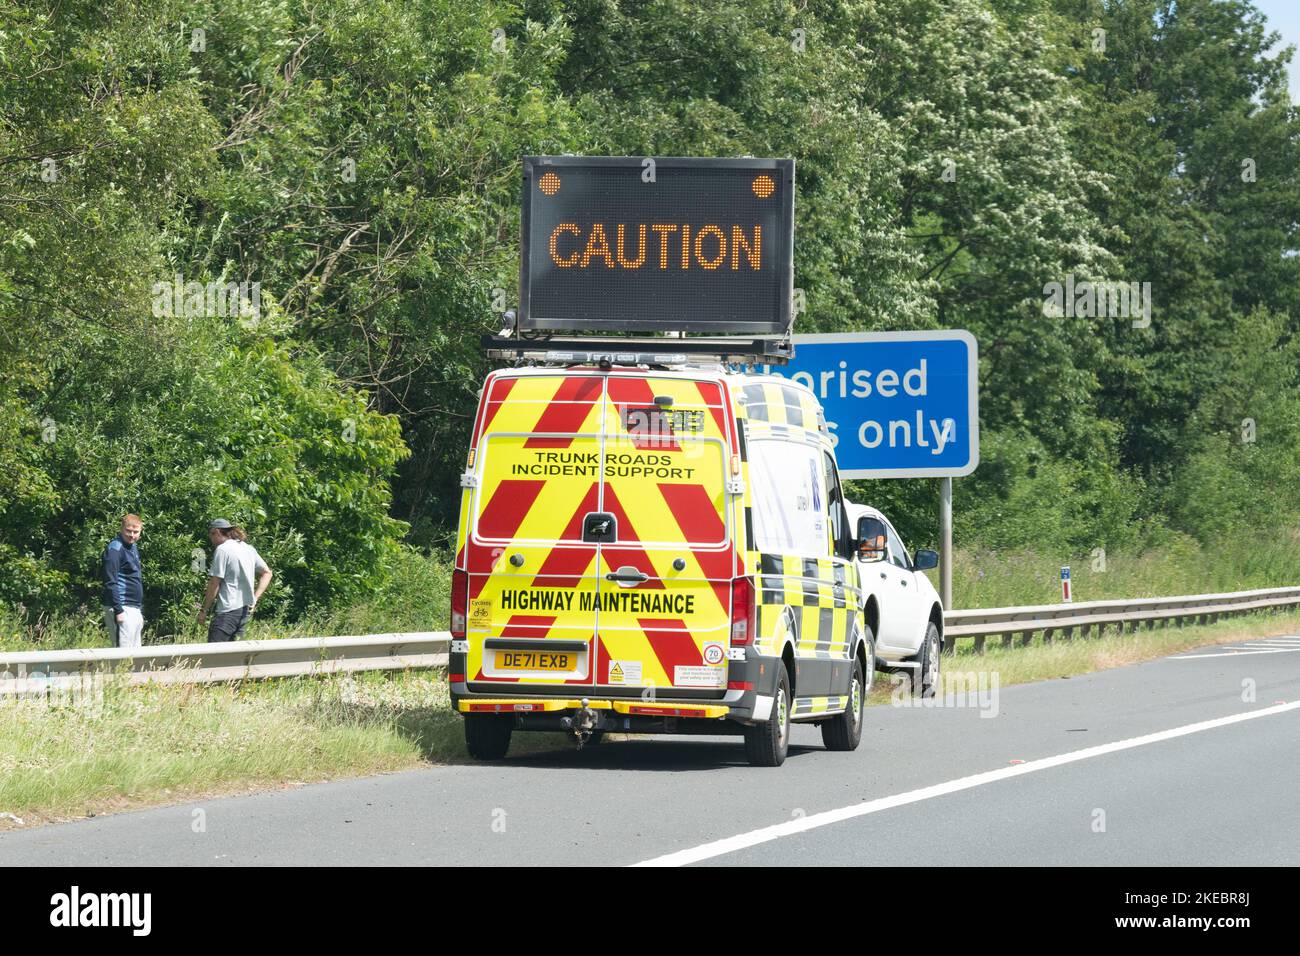 Amey Trunk Road Incident Support Service (TISS) vehicle with caution sign alerting drivers to a vehicle breakdown on the hard shoulder of motorway, UK Stock Photo